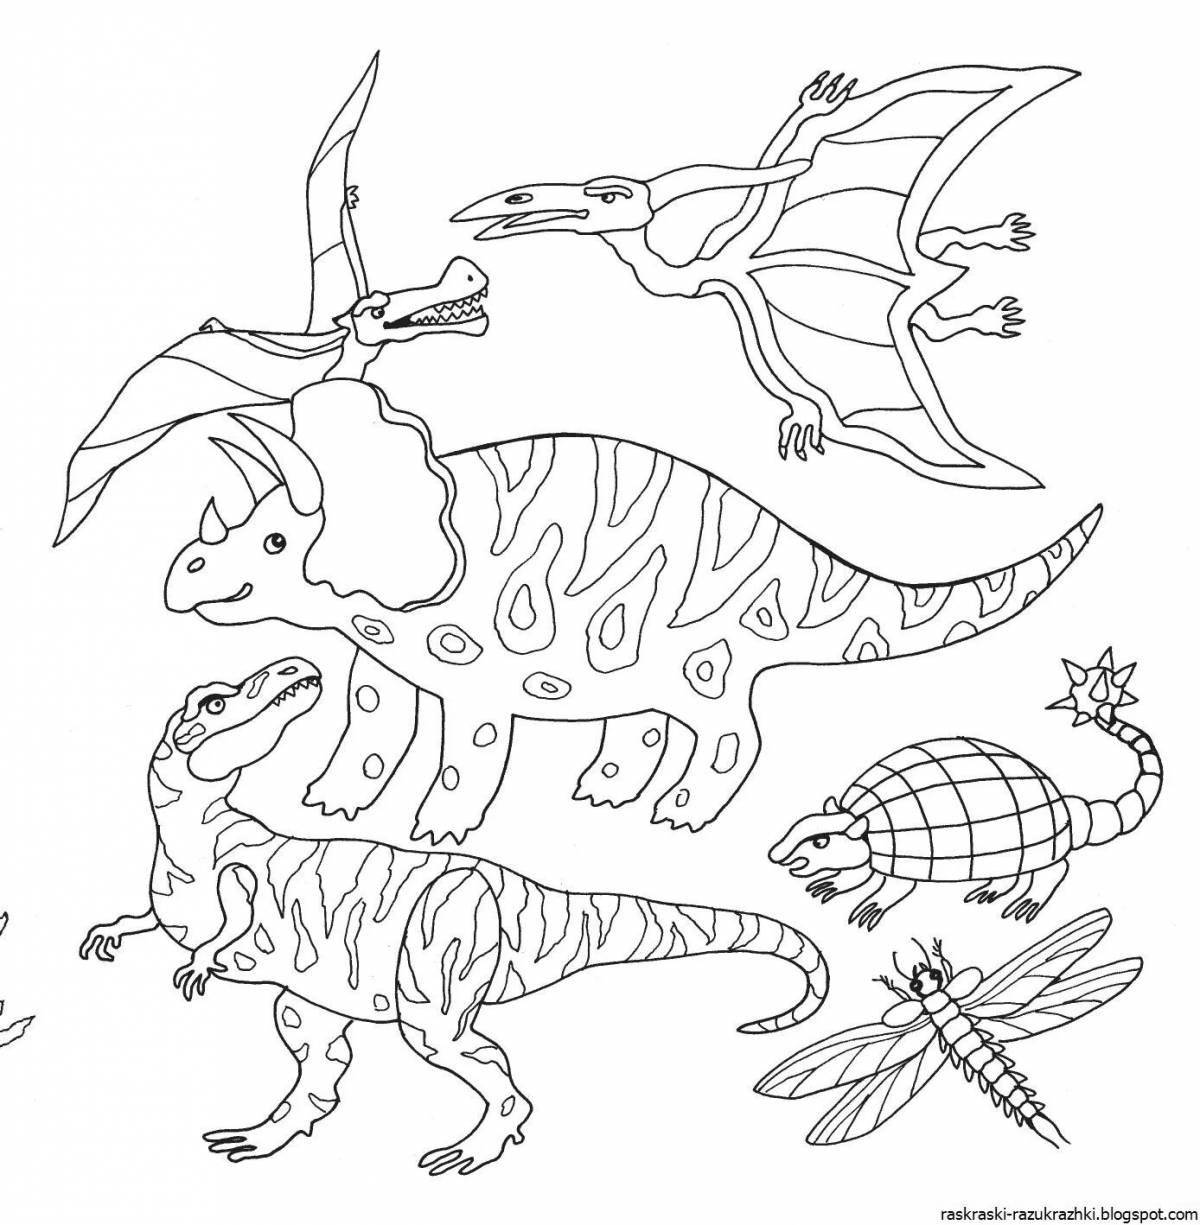 Fun dinosaur coloring book for 7-8 year olds